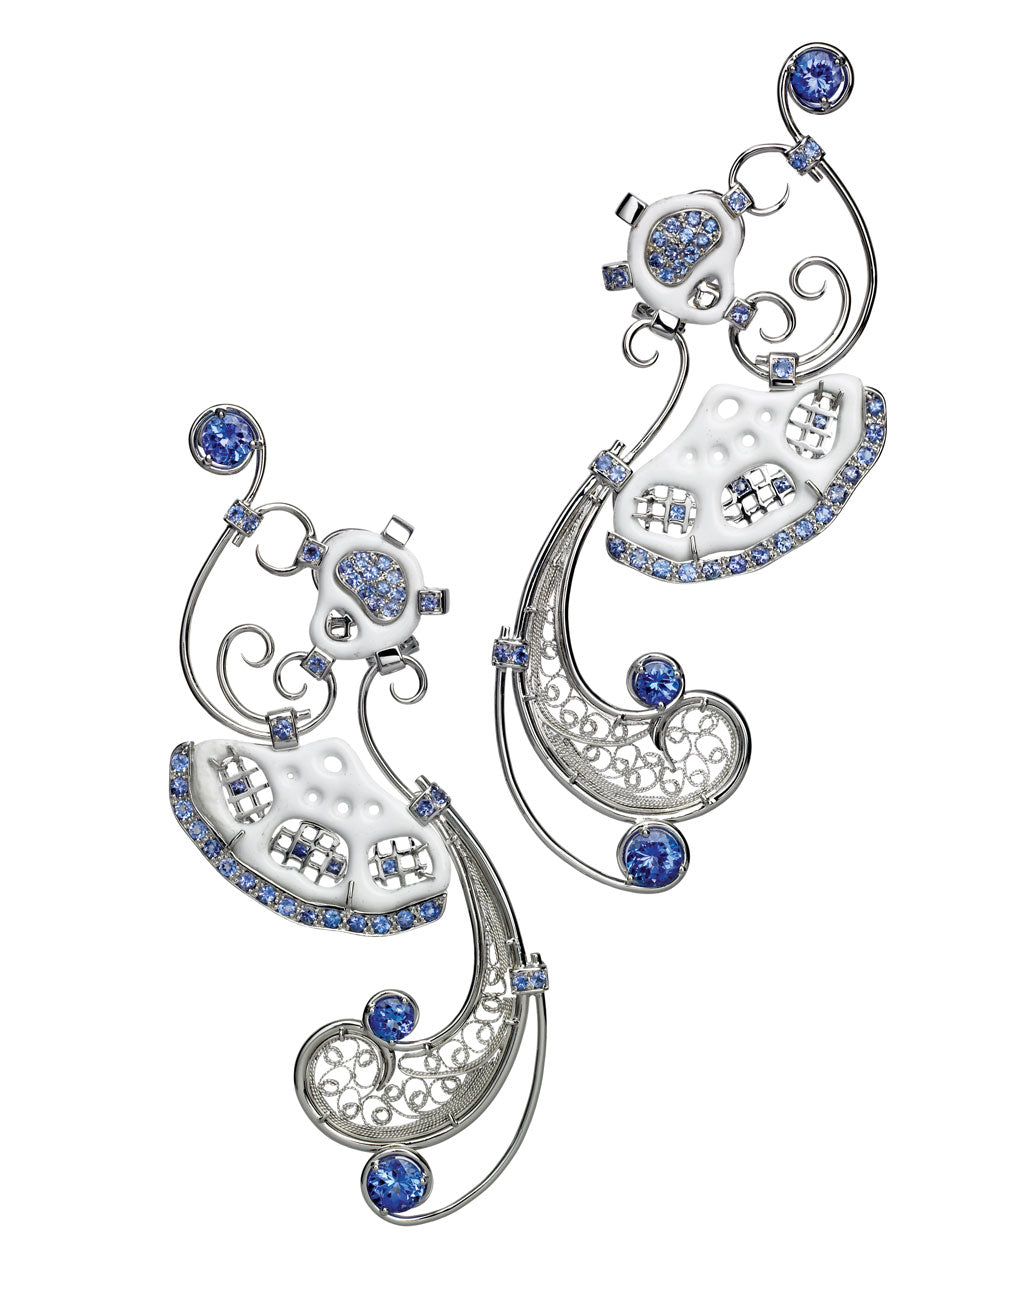 One-of-a-kind filigree earrings, crafted using 18ct white gold, fair-traded tanzanite and white enamel